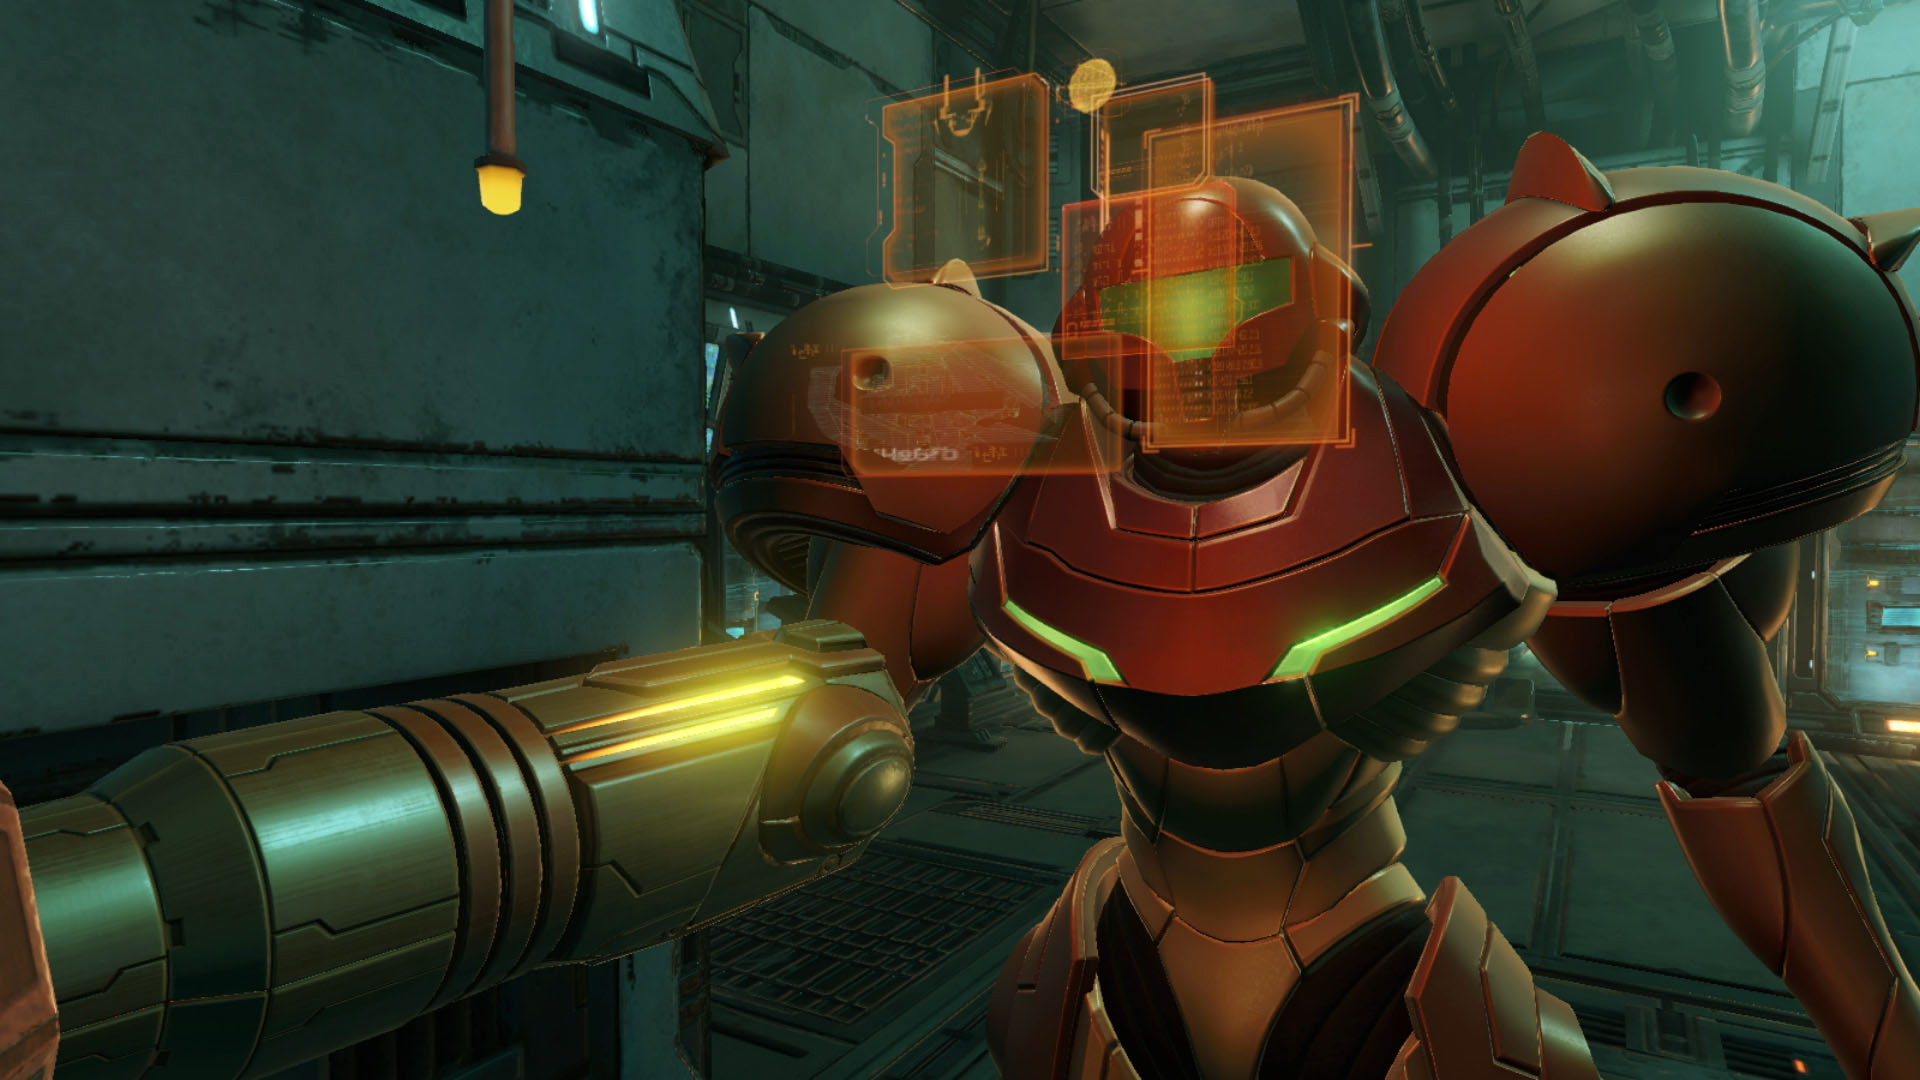 Metroid Prime Remastered review: “Resonates as much as it did 20 years ago”